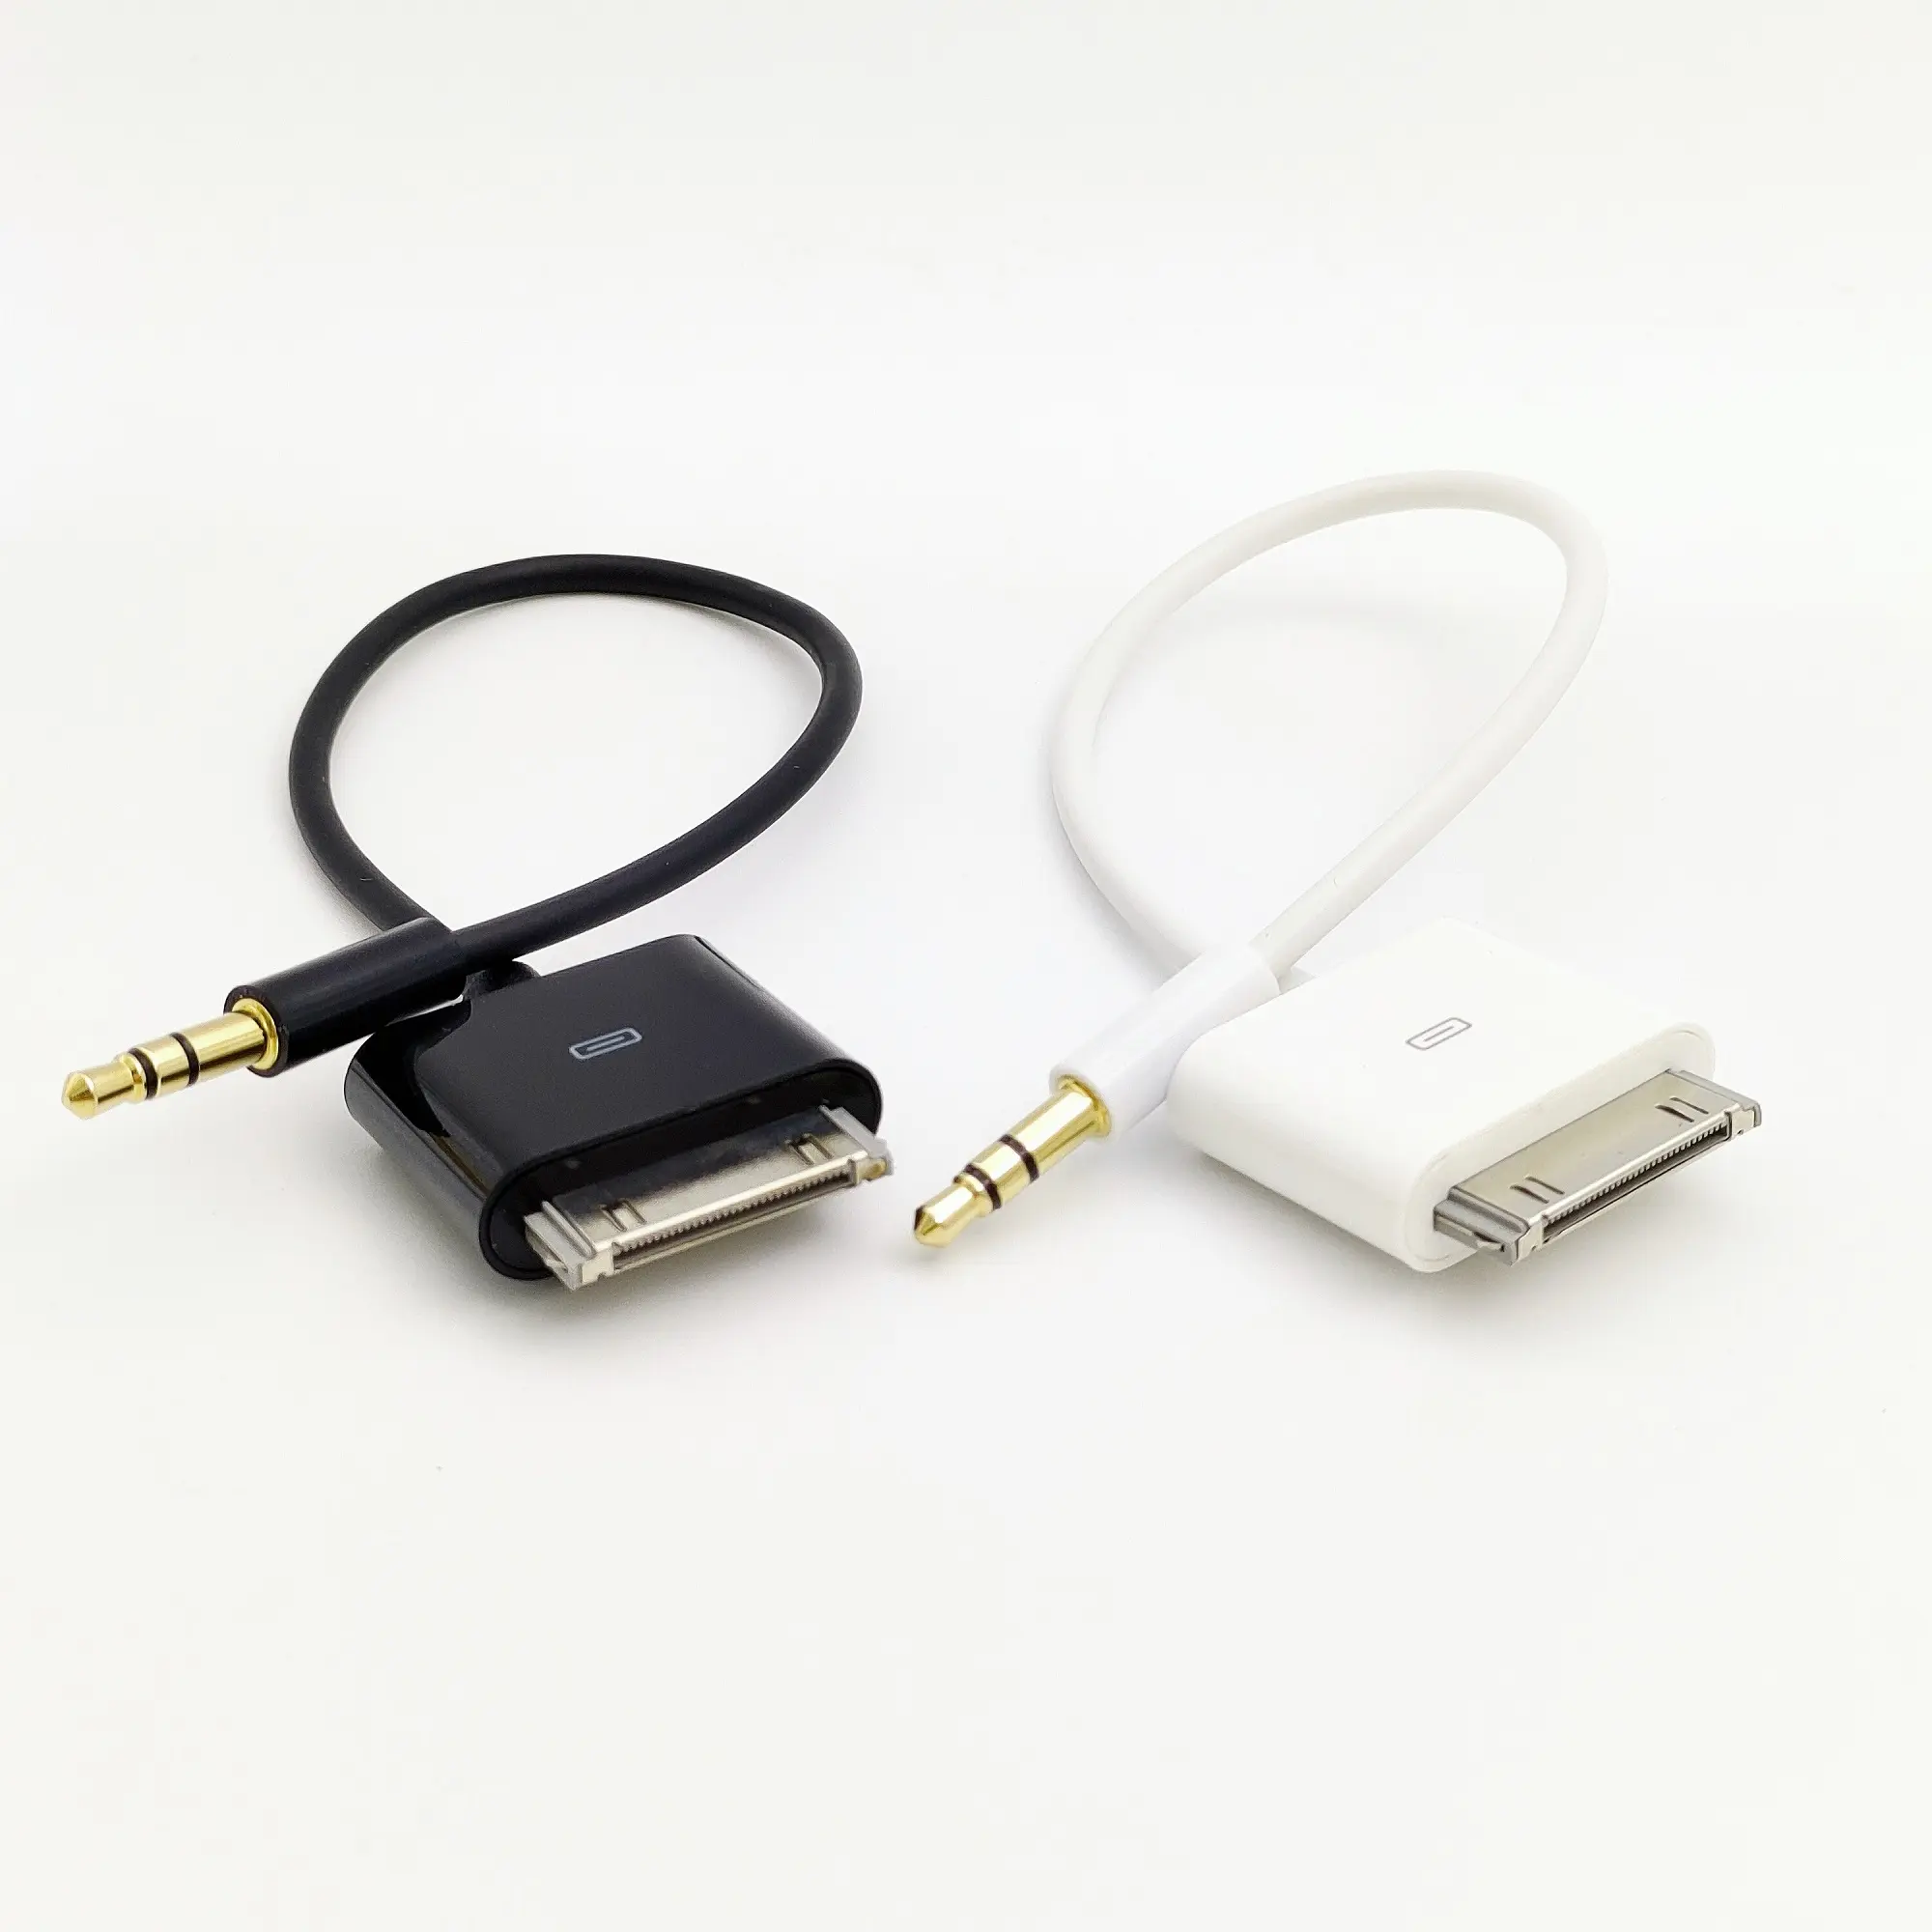 20cm Dock Connector To Aux 3.5mm Car Audio Cable for iPod iPhone 3/4 iPad 1/2/3